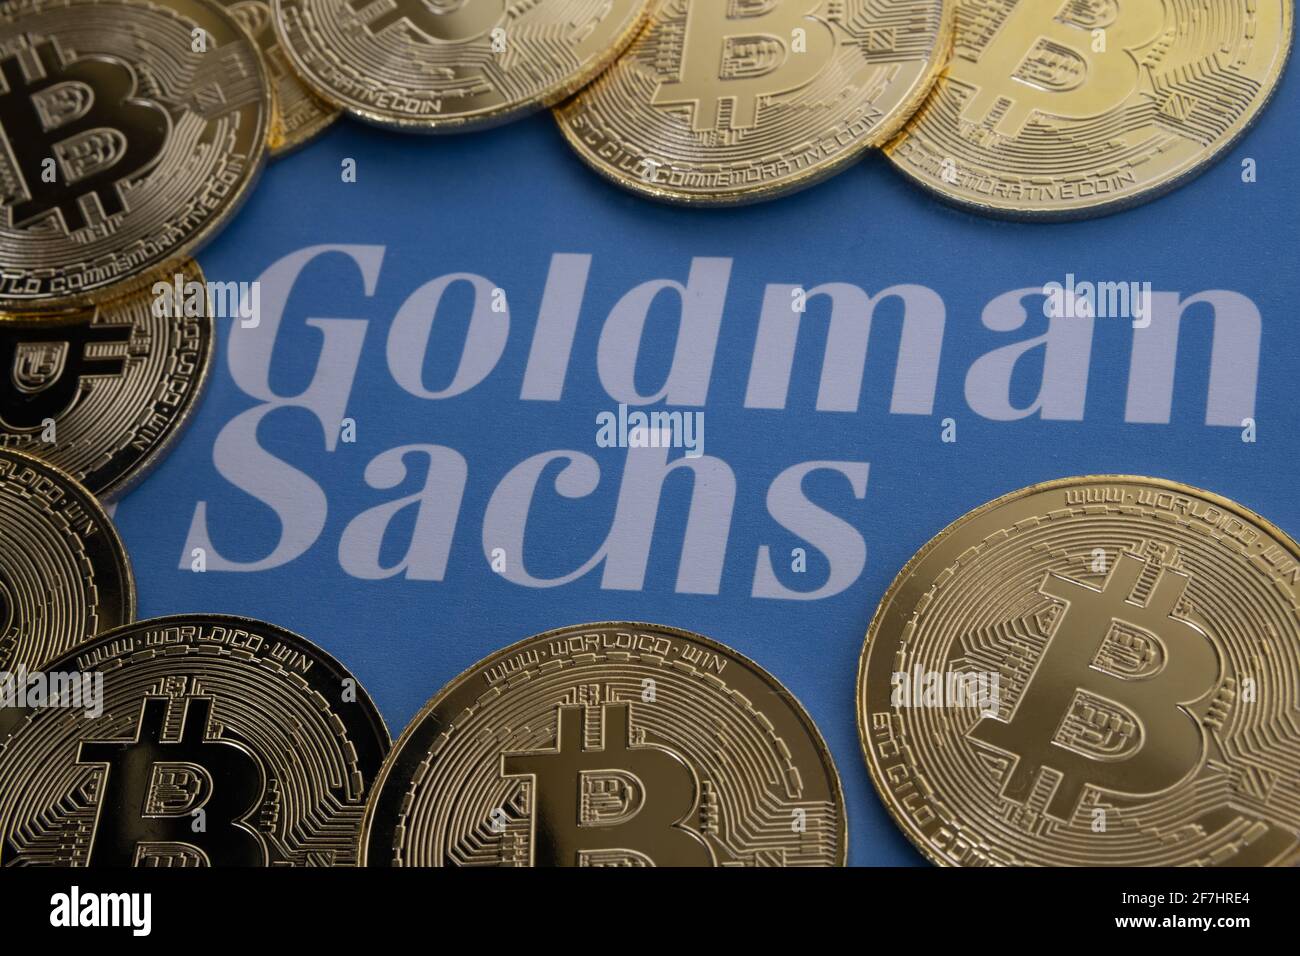 Bitcoin coins surround blurred Goldman Sachs logo seen on the paper. Concept. Selective focus. Stafford, United Kingdom, April 7, 2021. Stock Photo